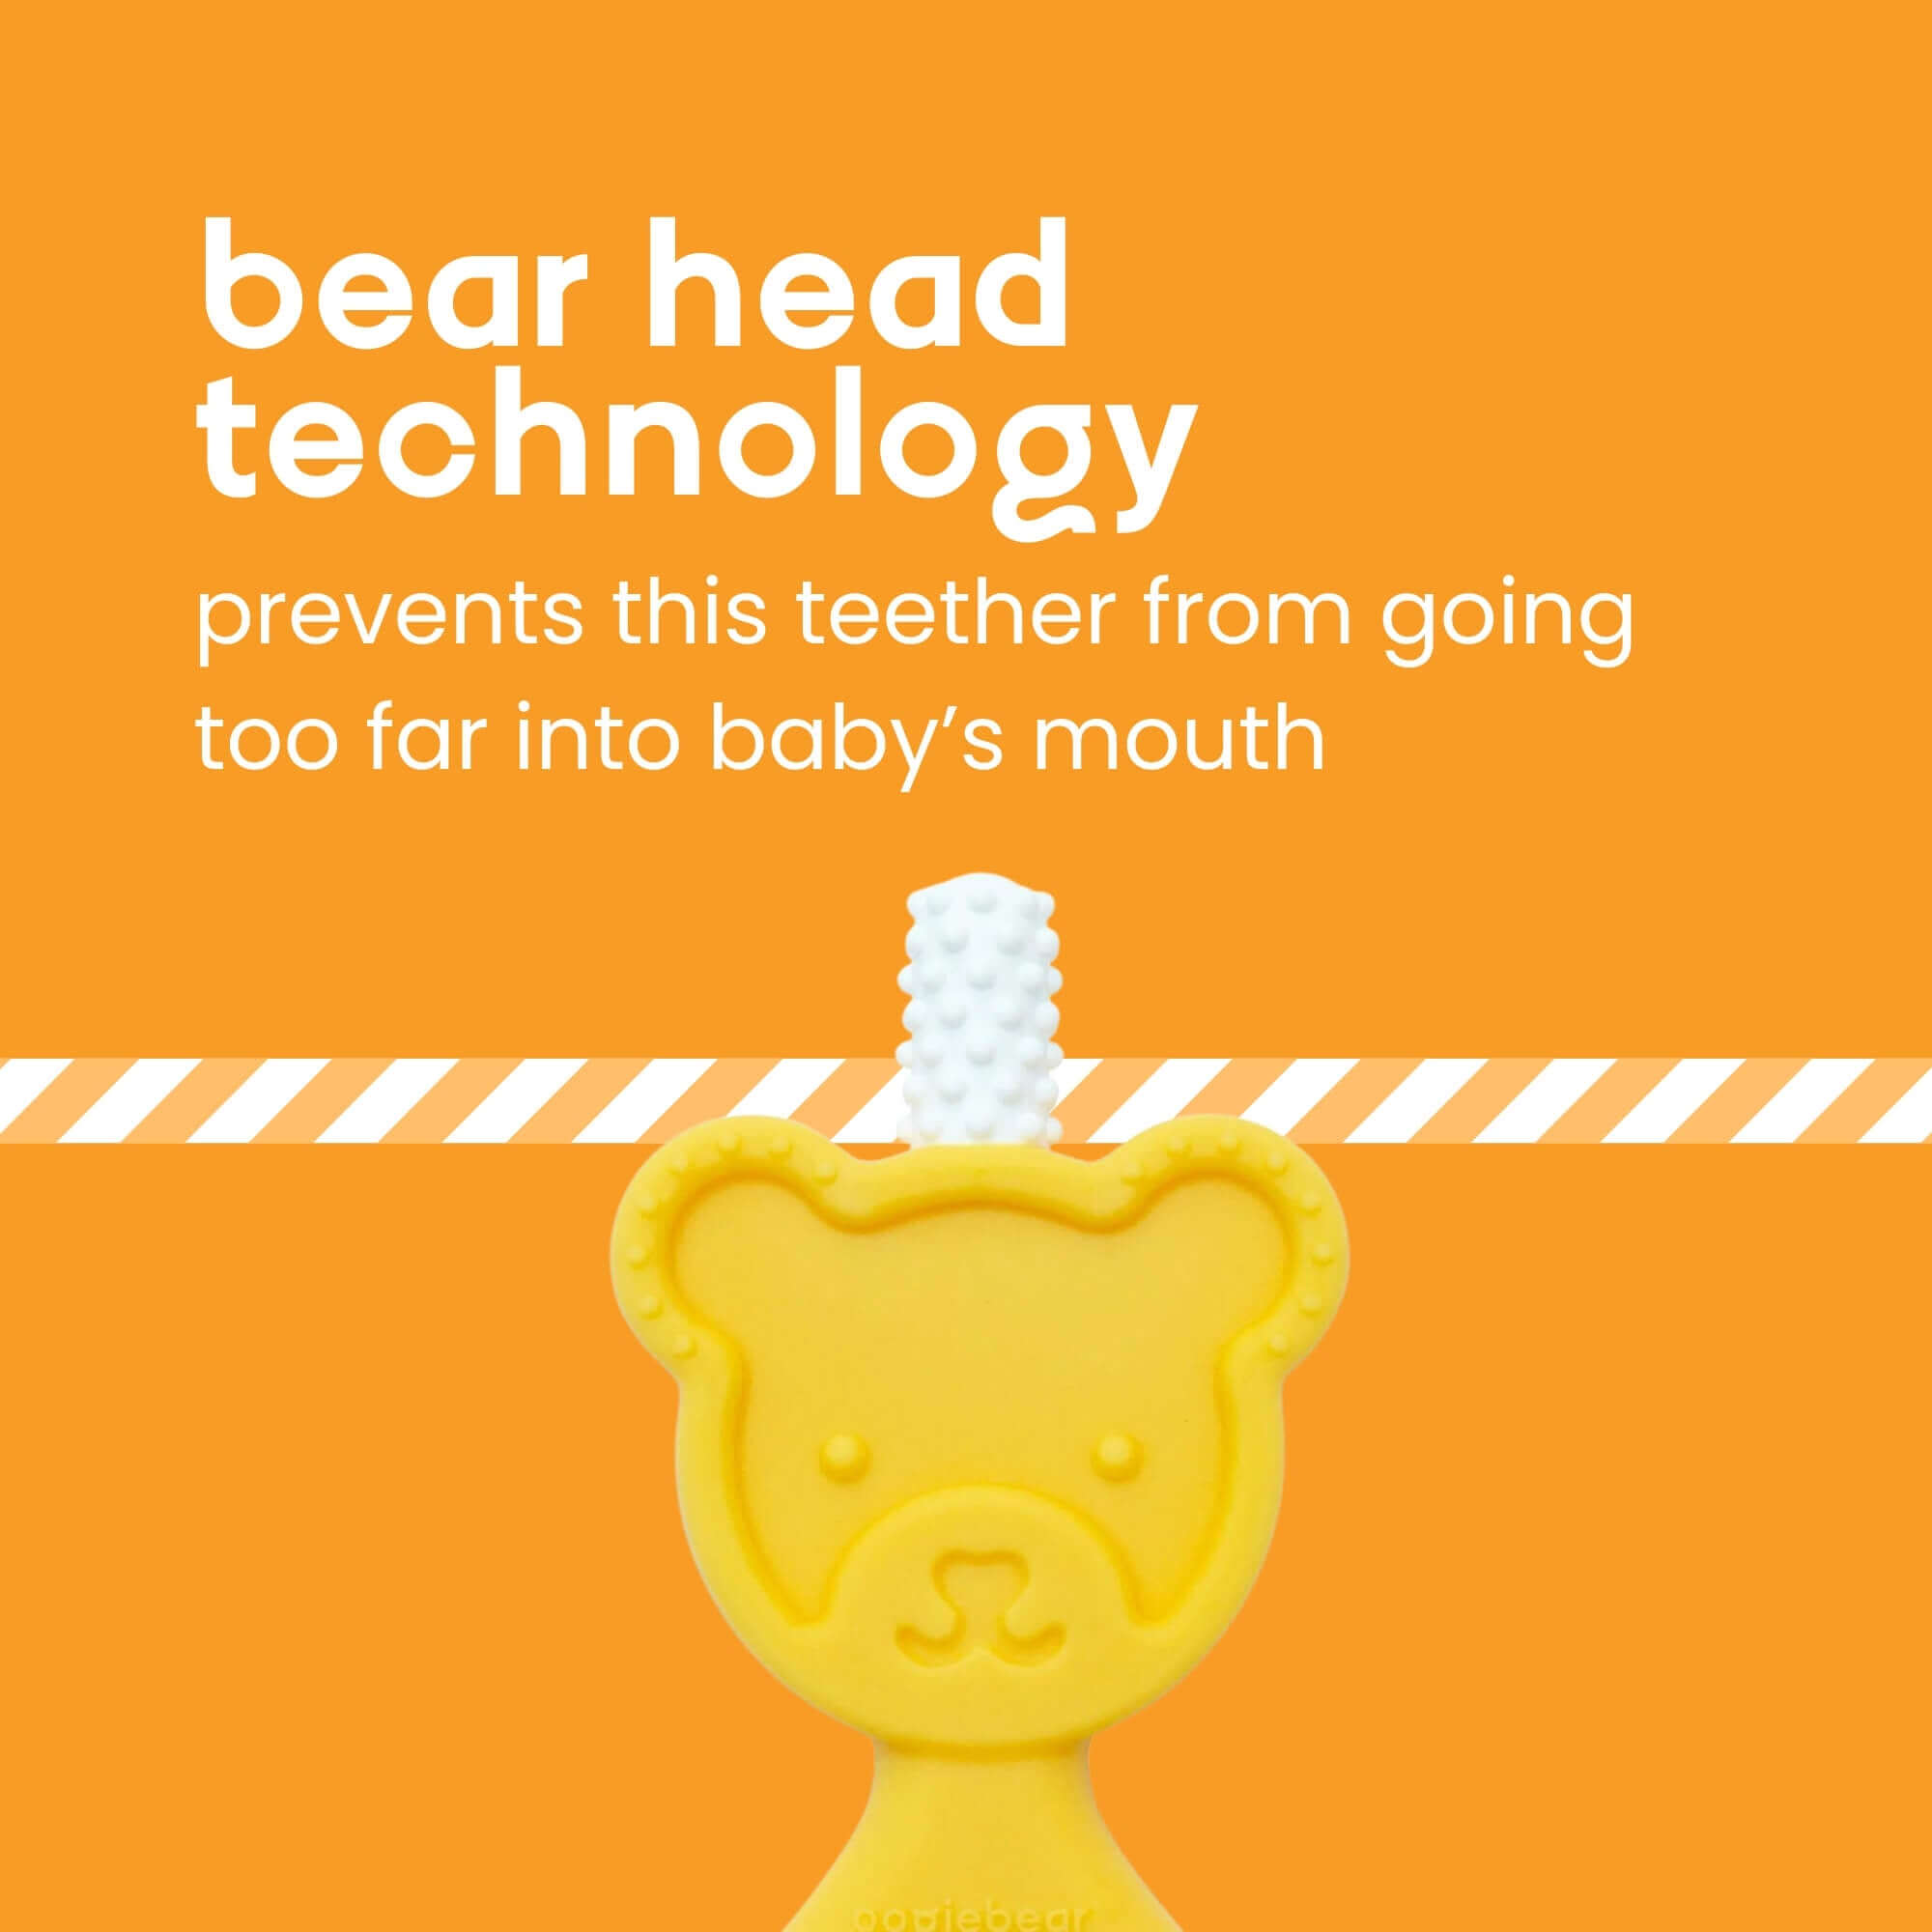 equipped with bear head technology, designed to be safe for babies